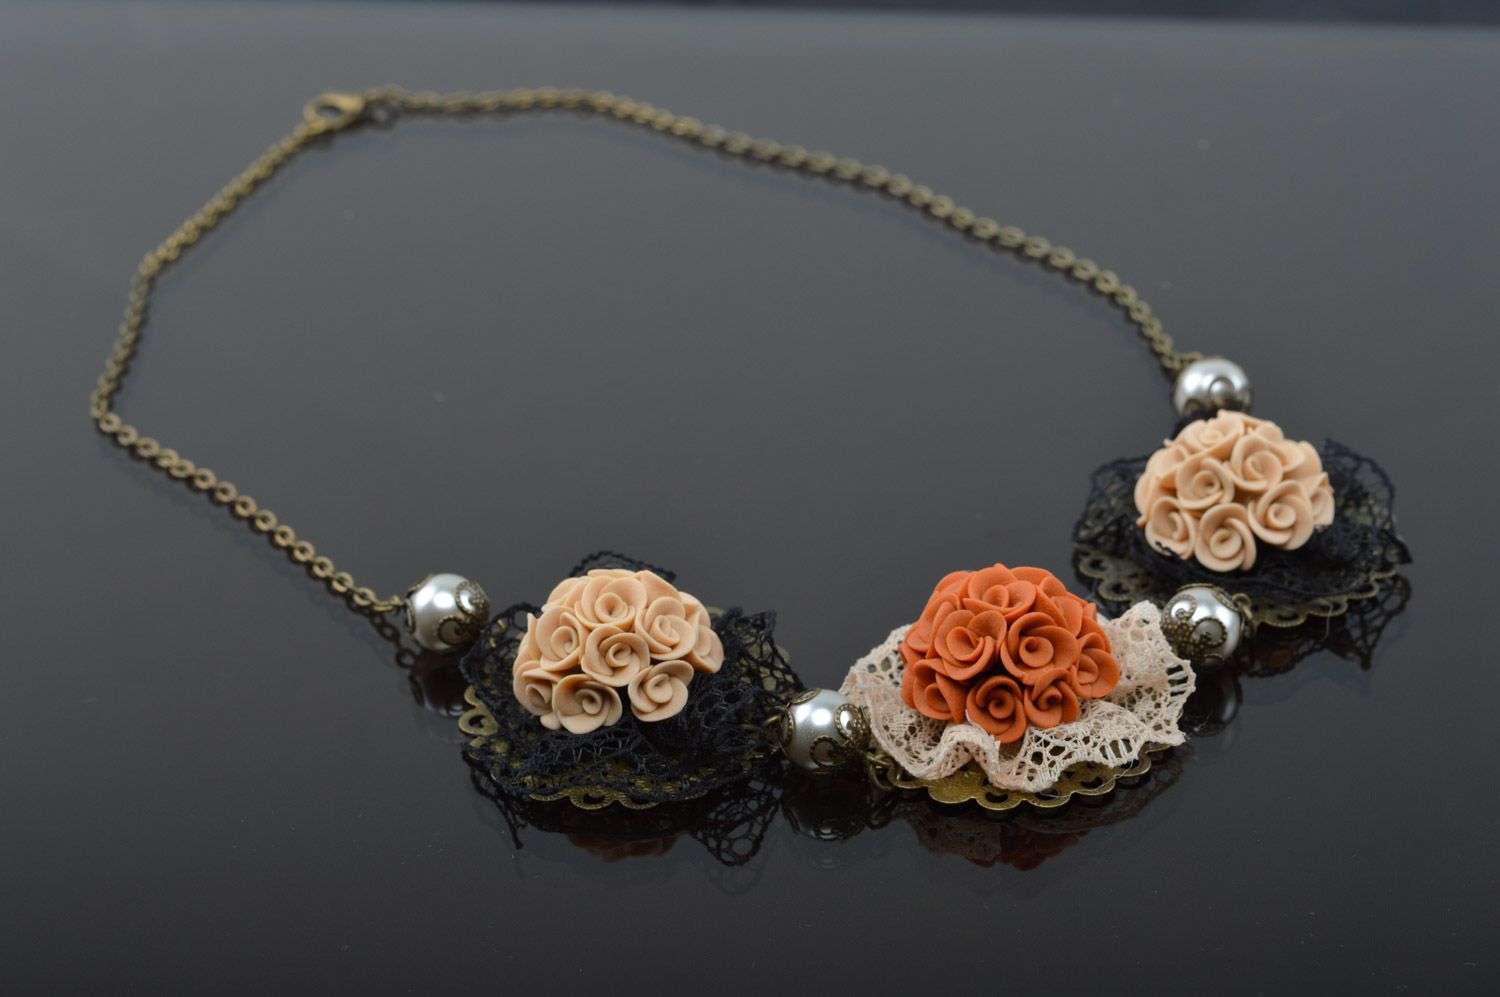 Handmade volume polymer clay flower necklace with lace and beads in antique style photo 1